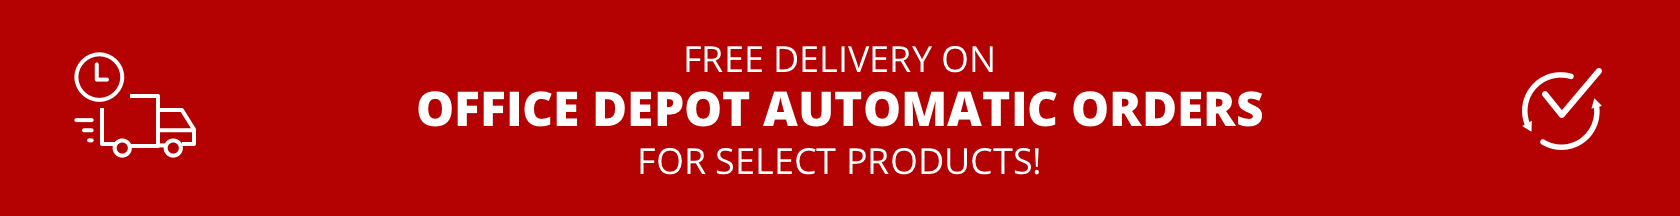 Free Delivery On Office Depot Automatic Orders for select products